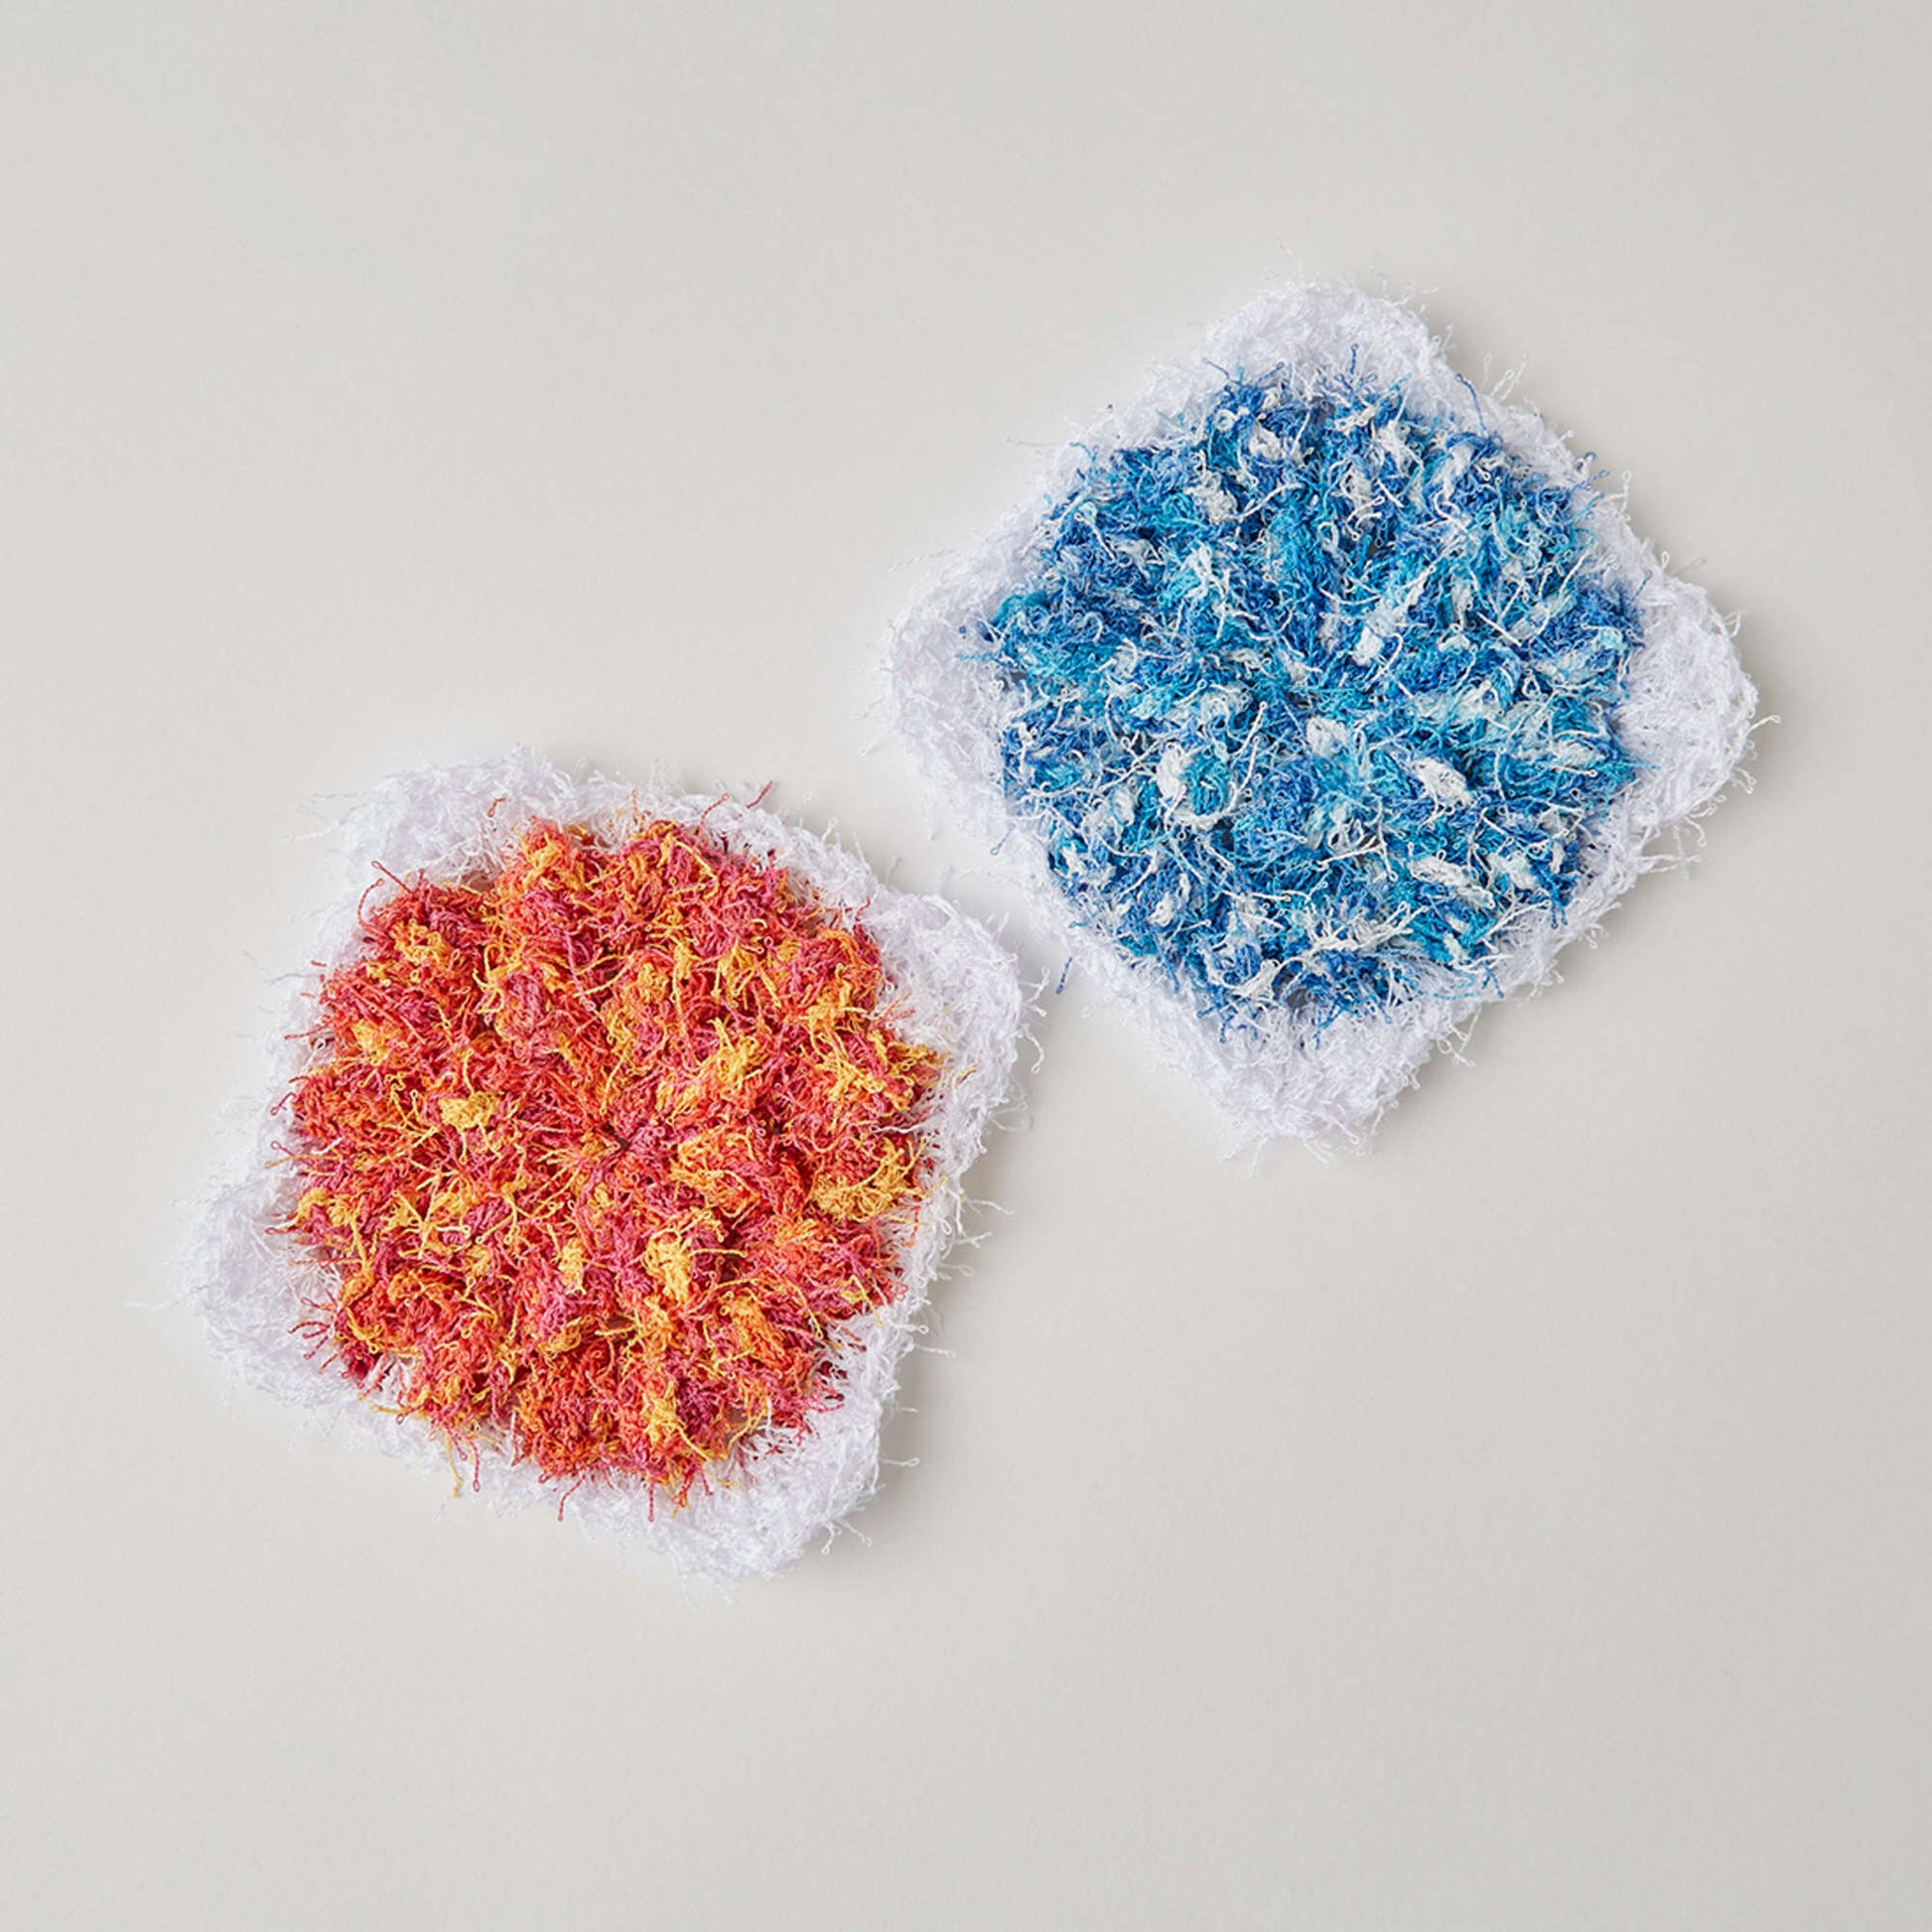 Red Heart Floral Popcorn Scrubby Red Heart Floral Popcorn Scrubby